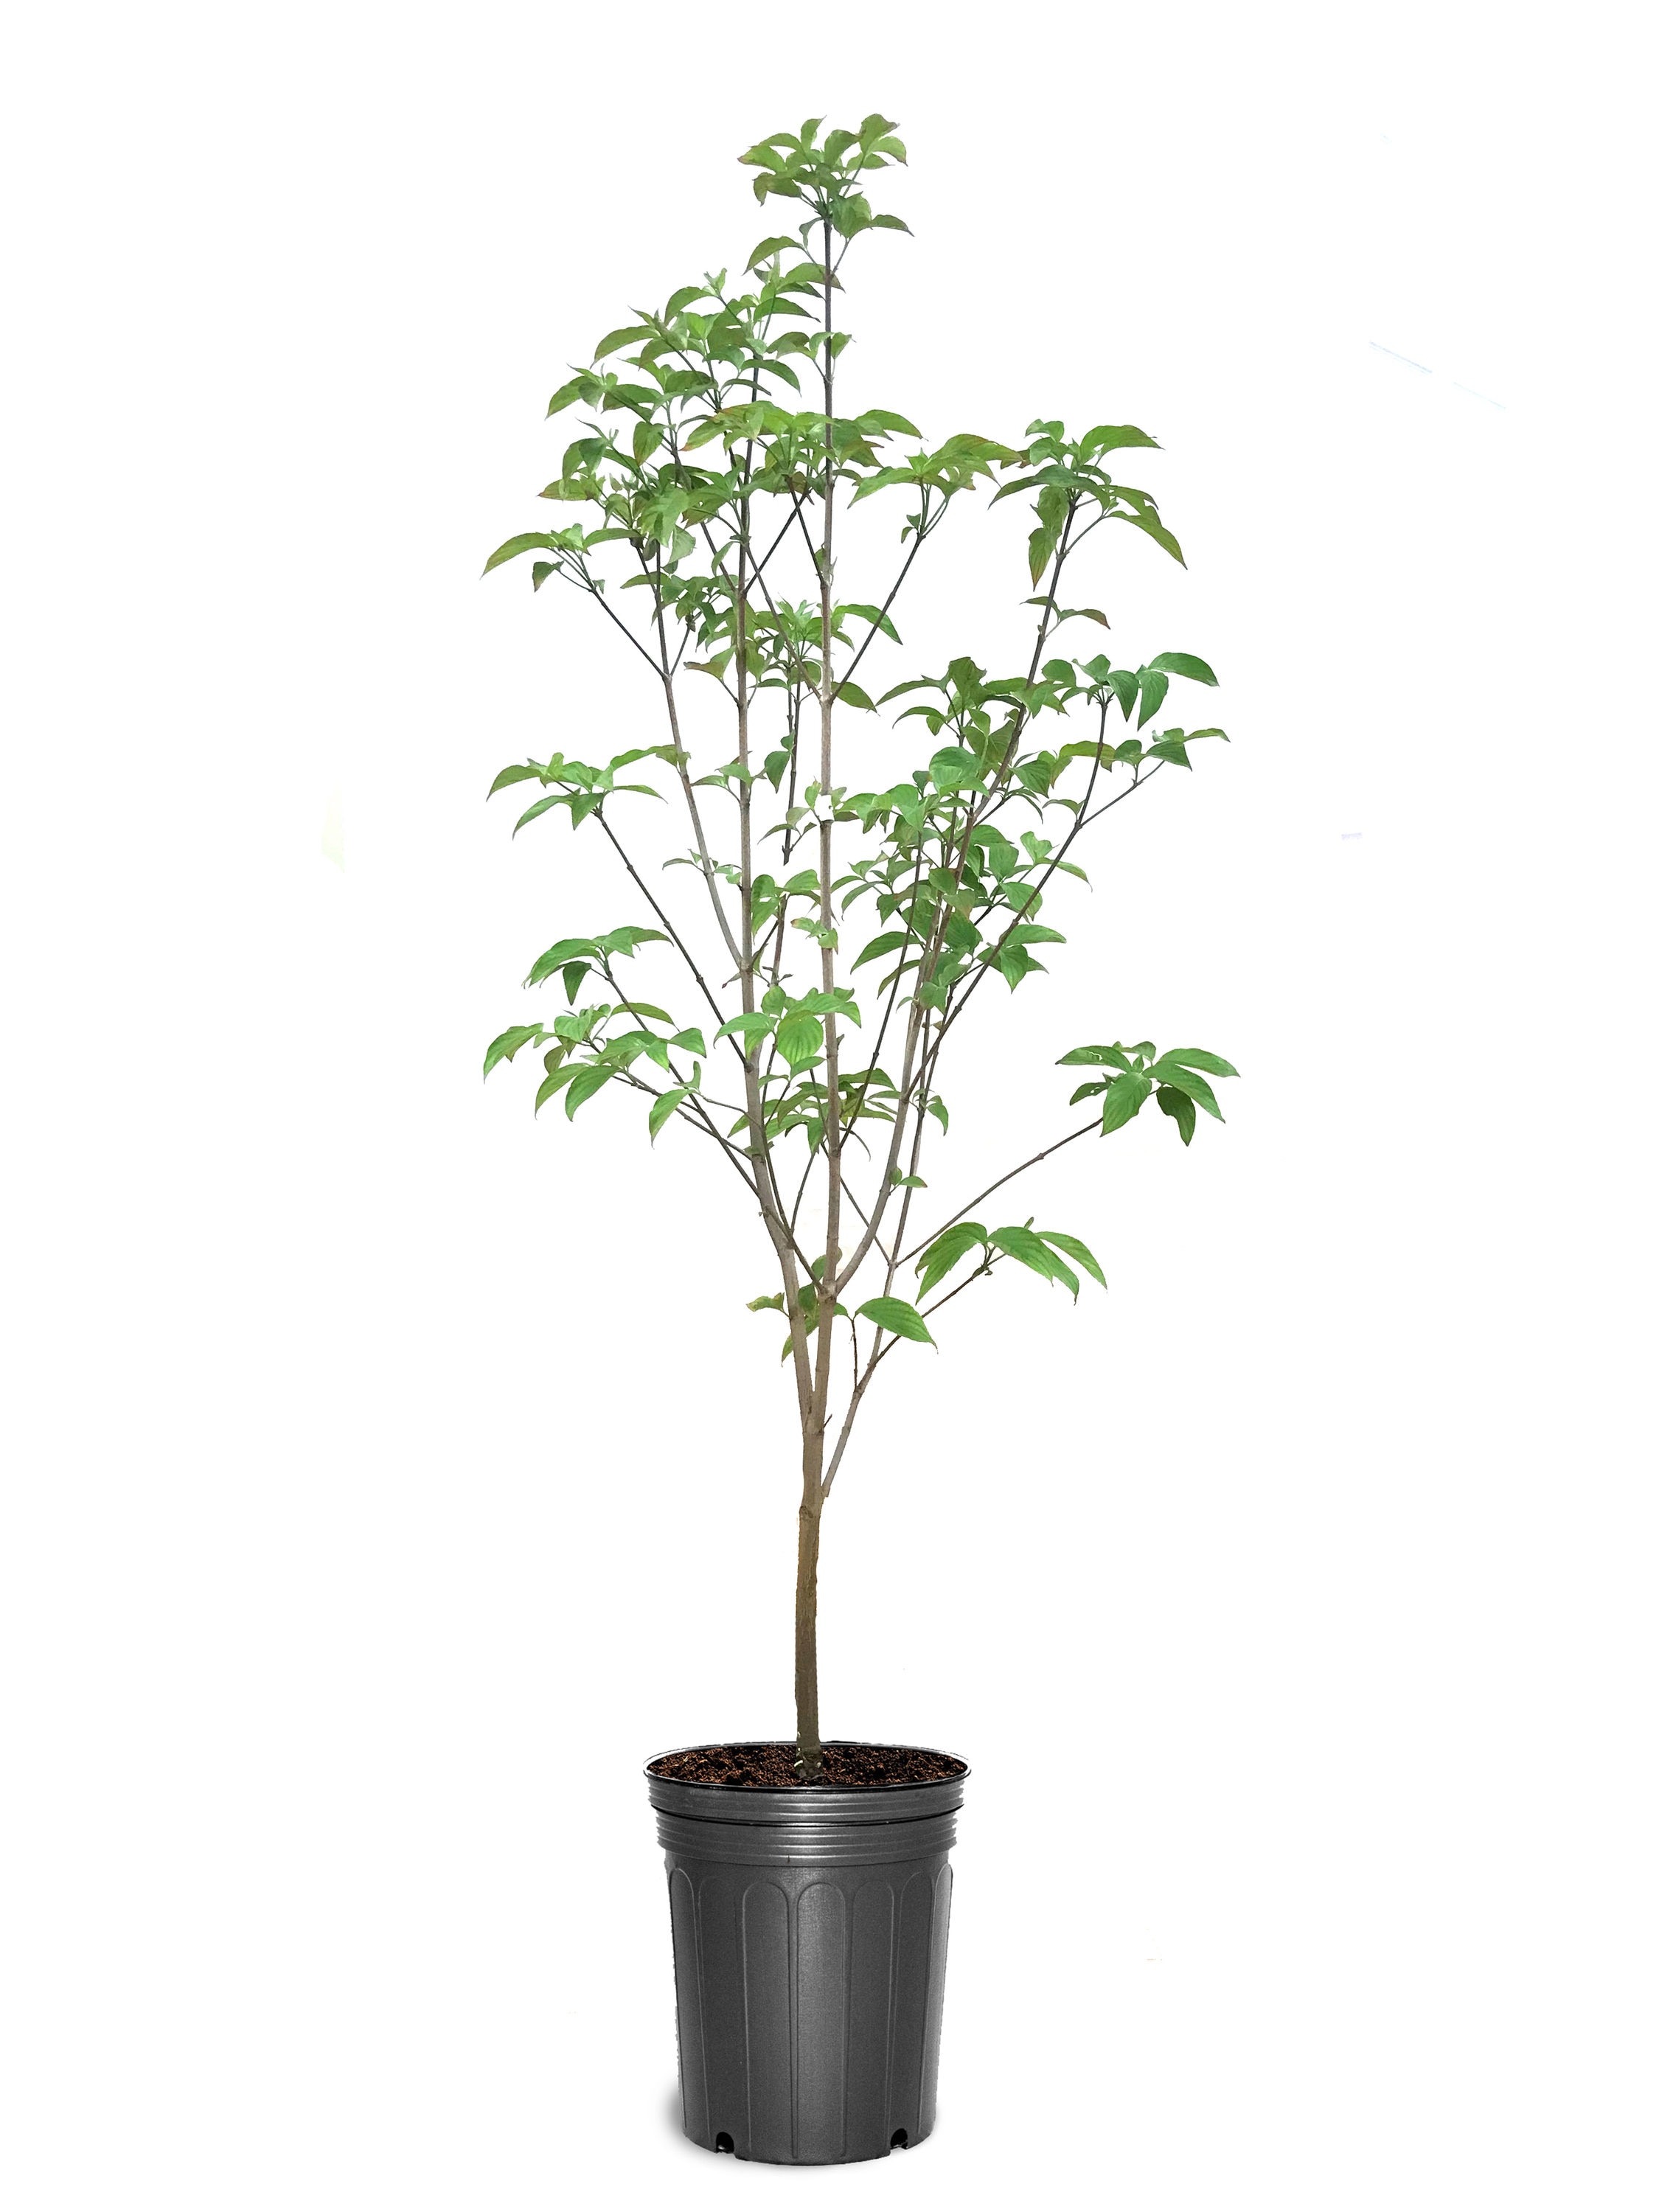 Lowe's 3.58-Gallon Pomegranate Tree (L7402) - Upright Deciduous Tree with  Showy Red Flowers - Full Sun - Medium Growth Rate in the Fruit Plants  department at